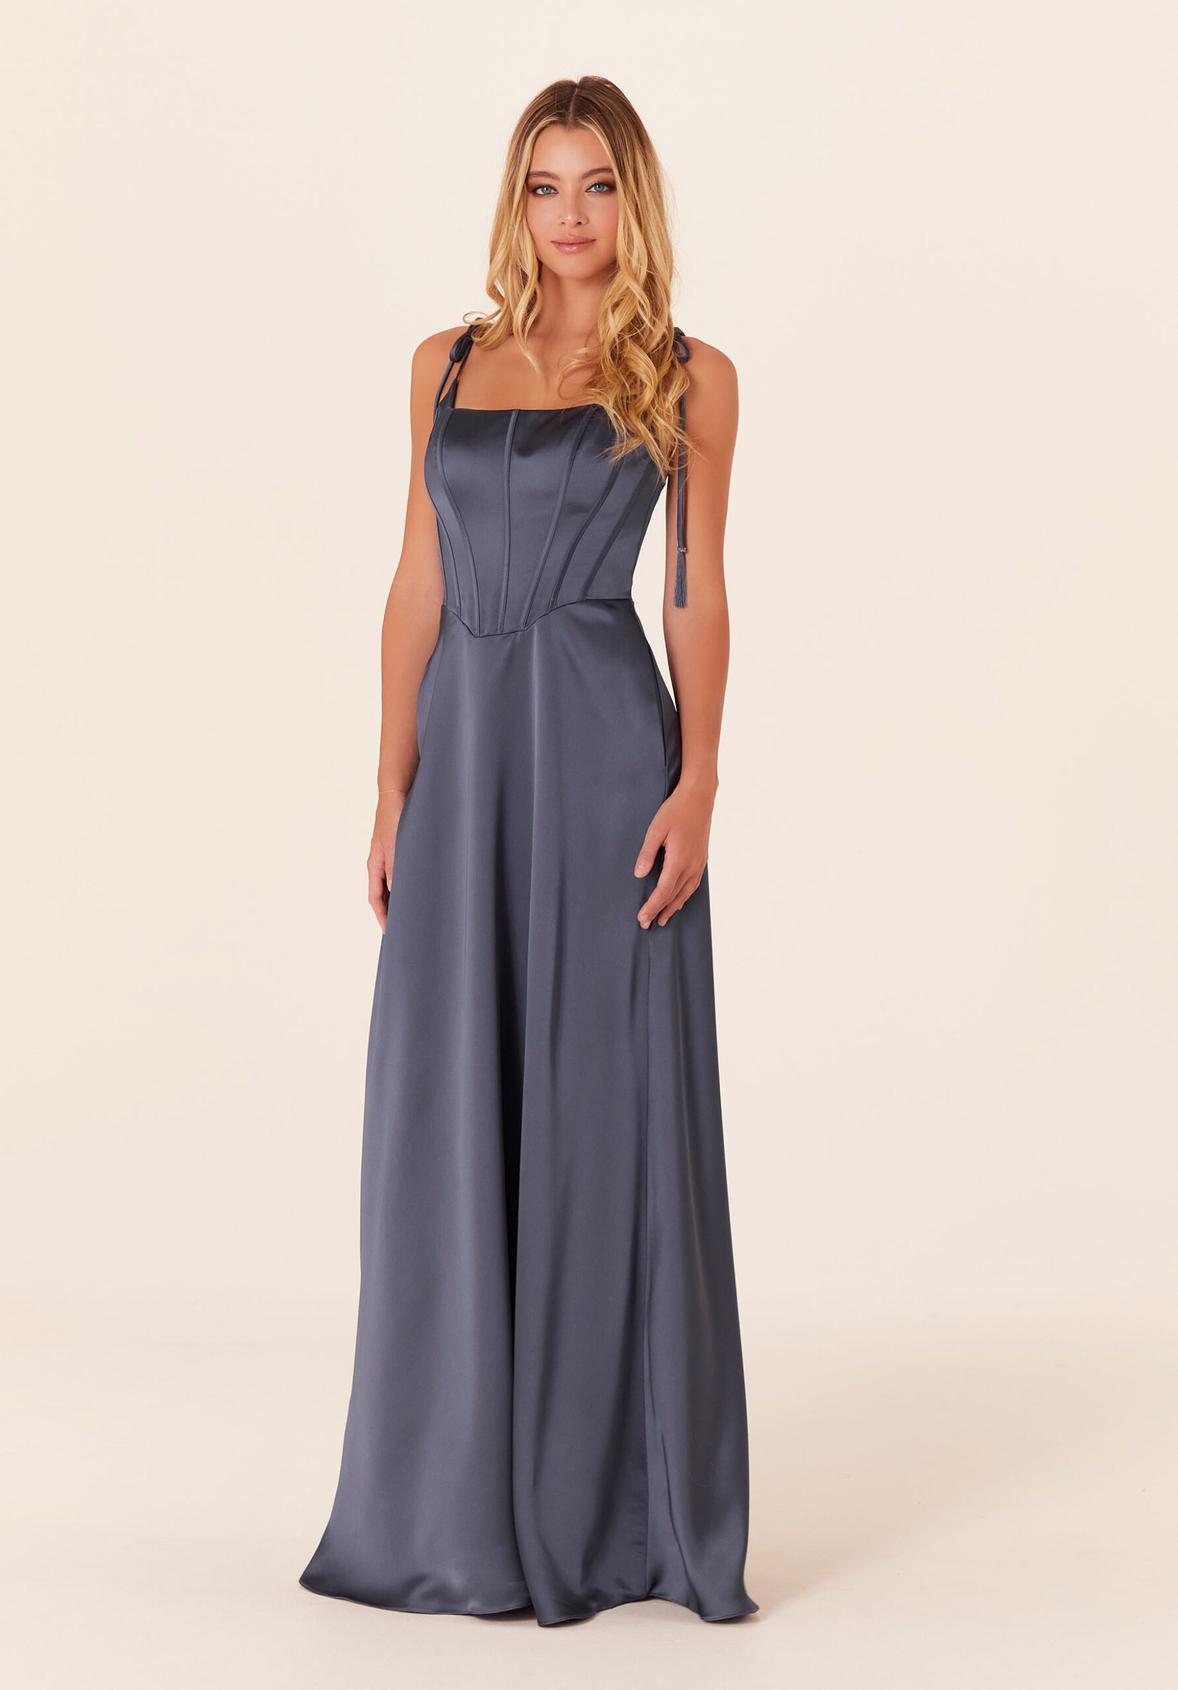 Luxe Satin Bridesmaid Dress with Corset Bodice offers in Morilee